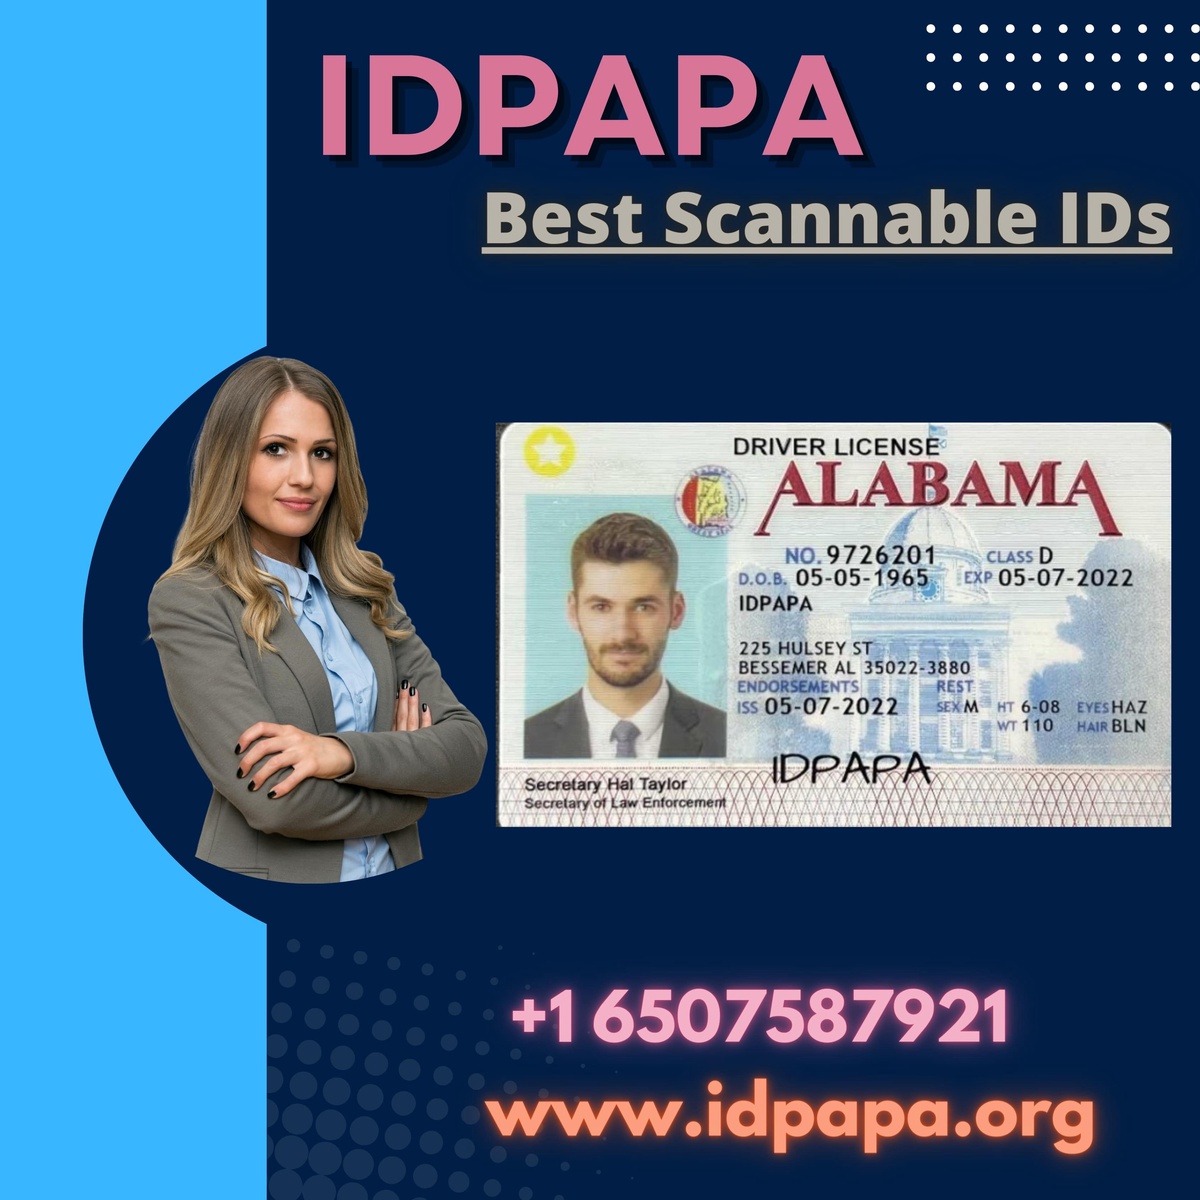 Unlock New Horizons: Secure Your World with the Best Scannable IDs from IDPAPA